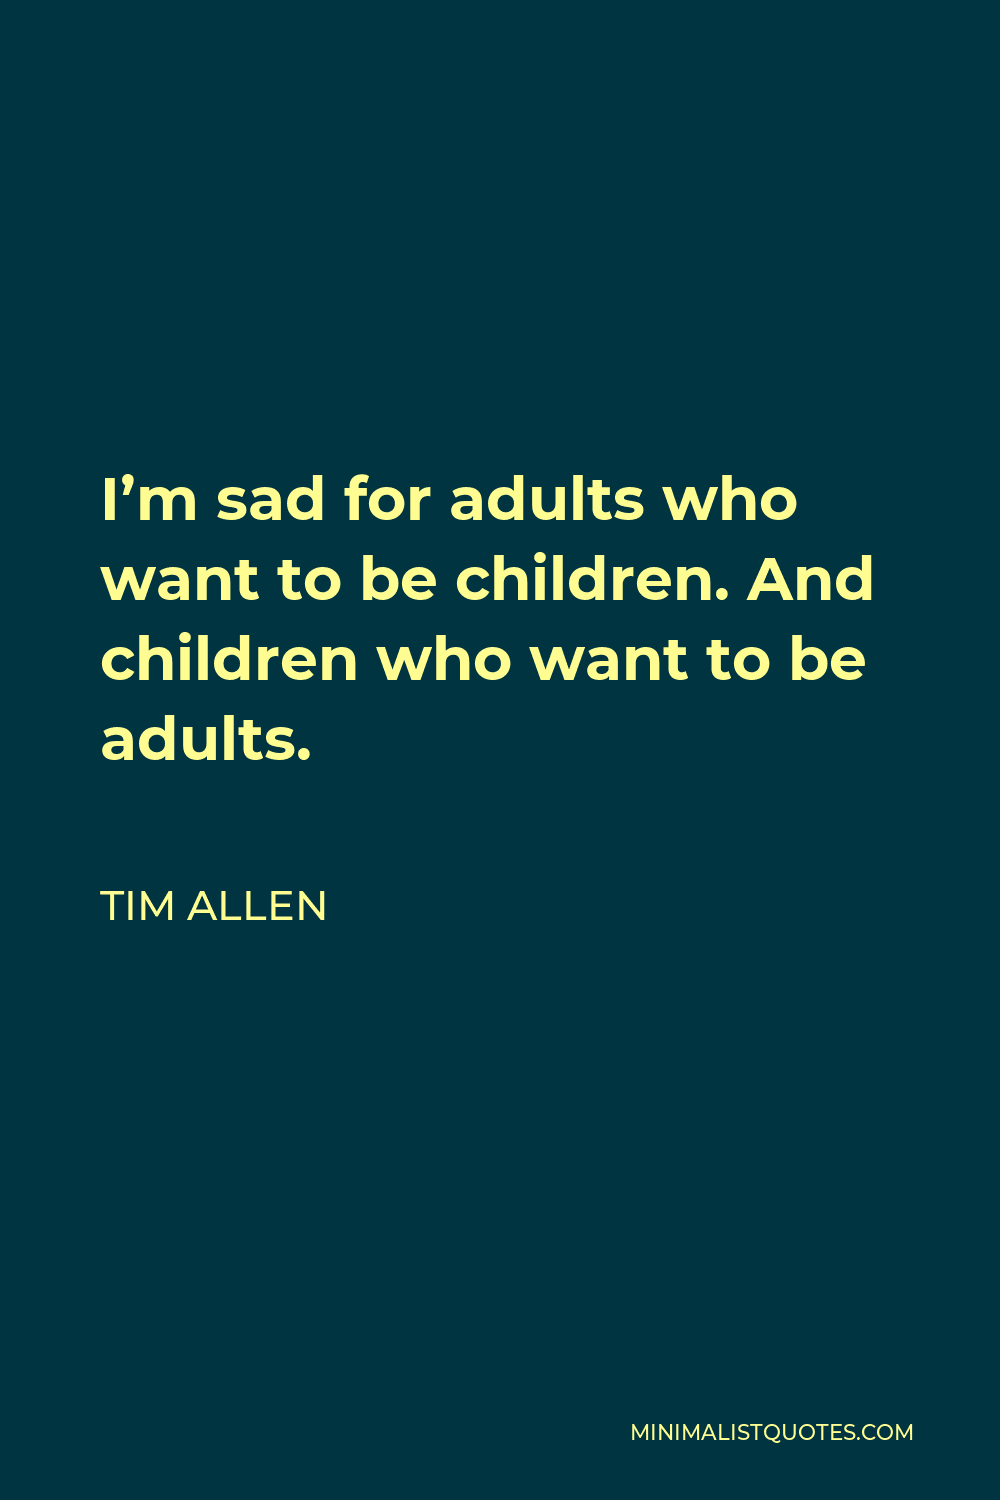 Tim Allen Quote - I’m sad for adults who want to be children. And children who want to be adults.